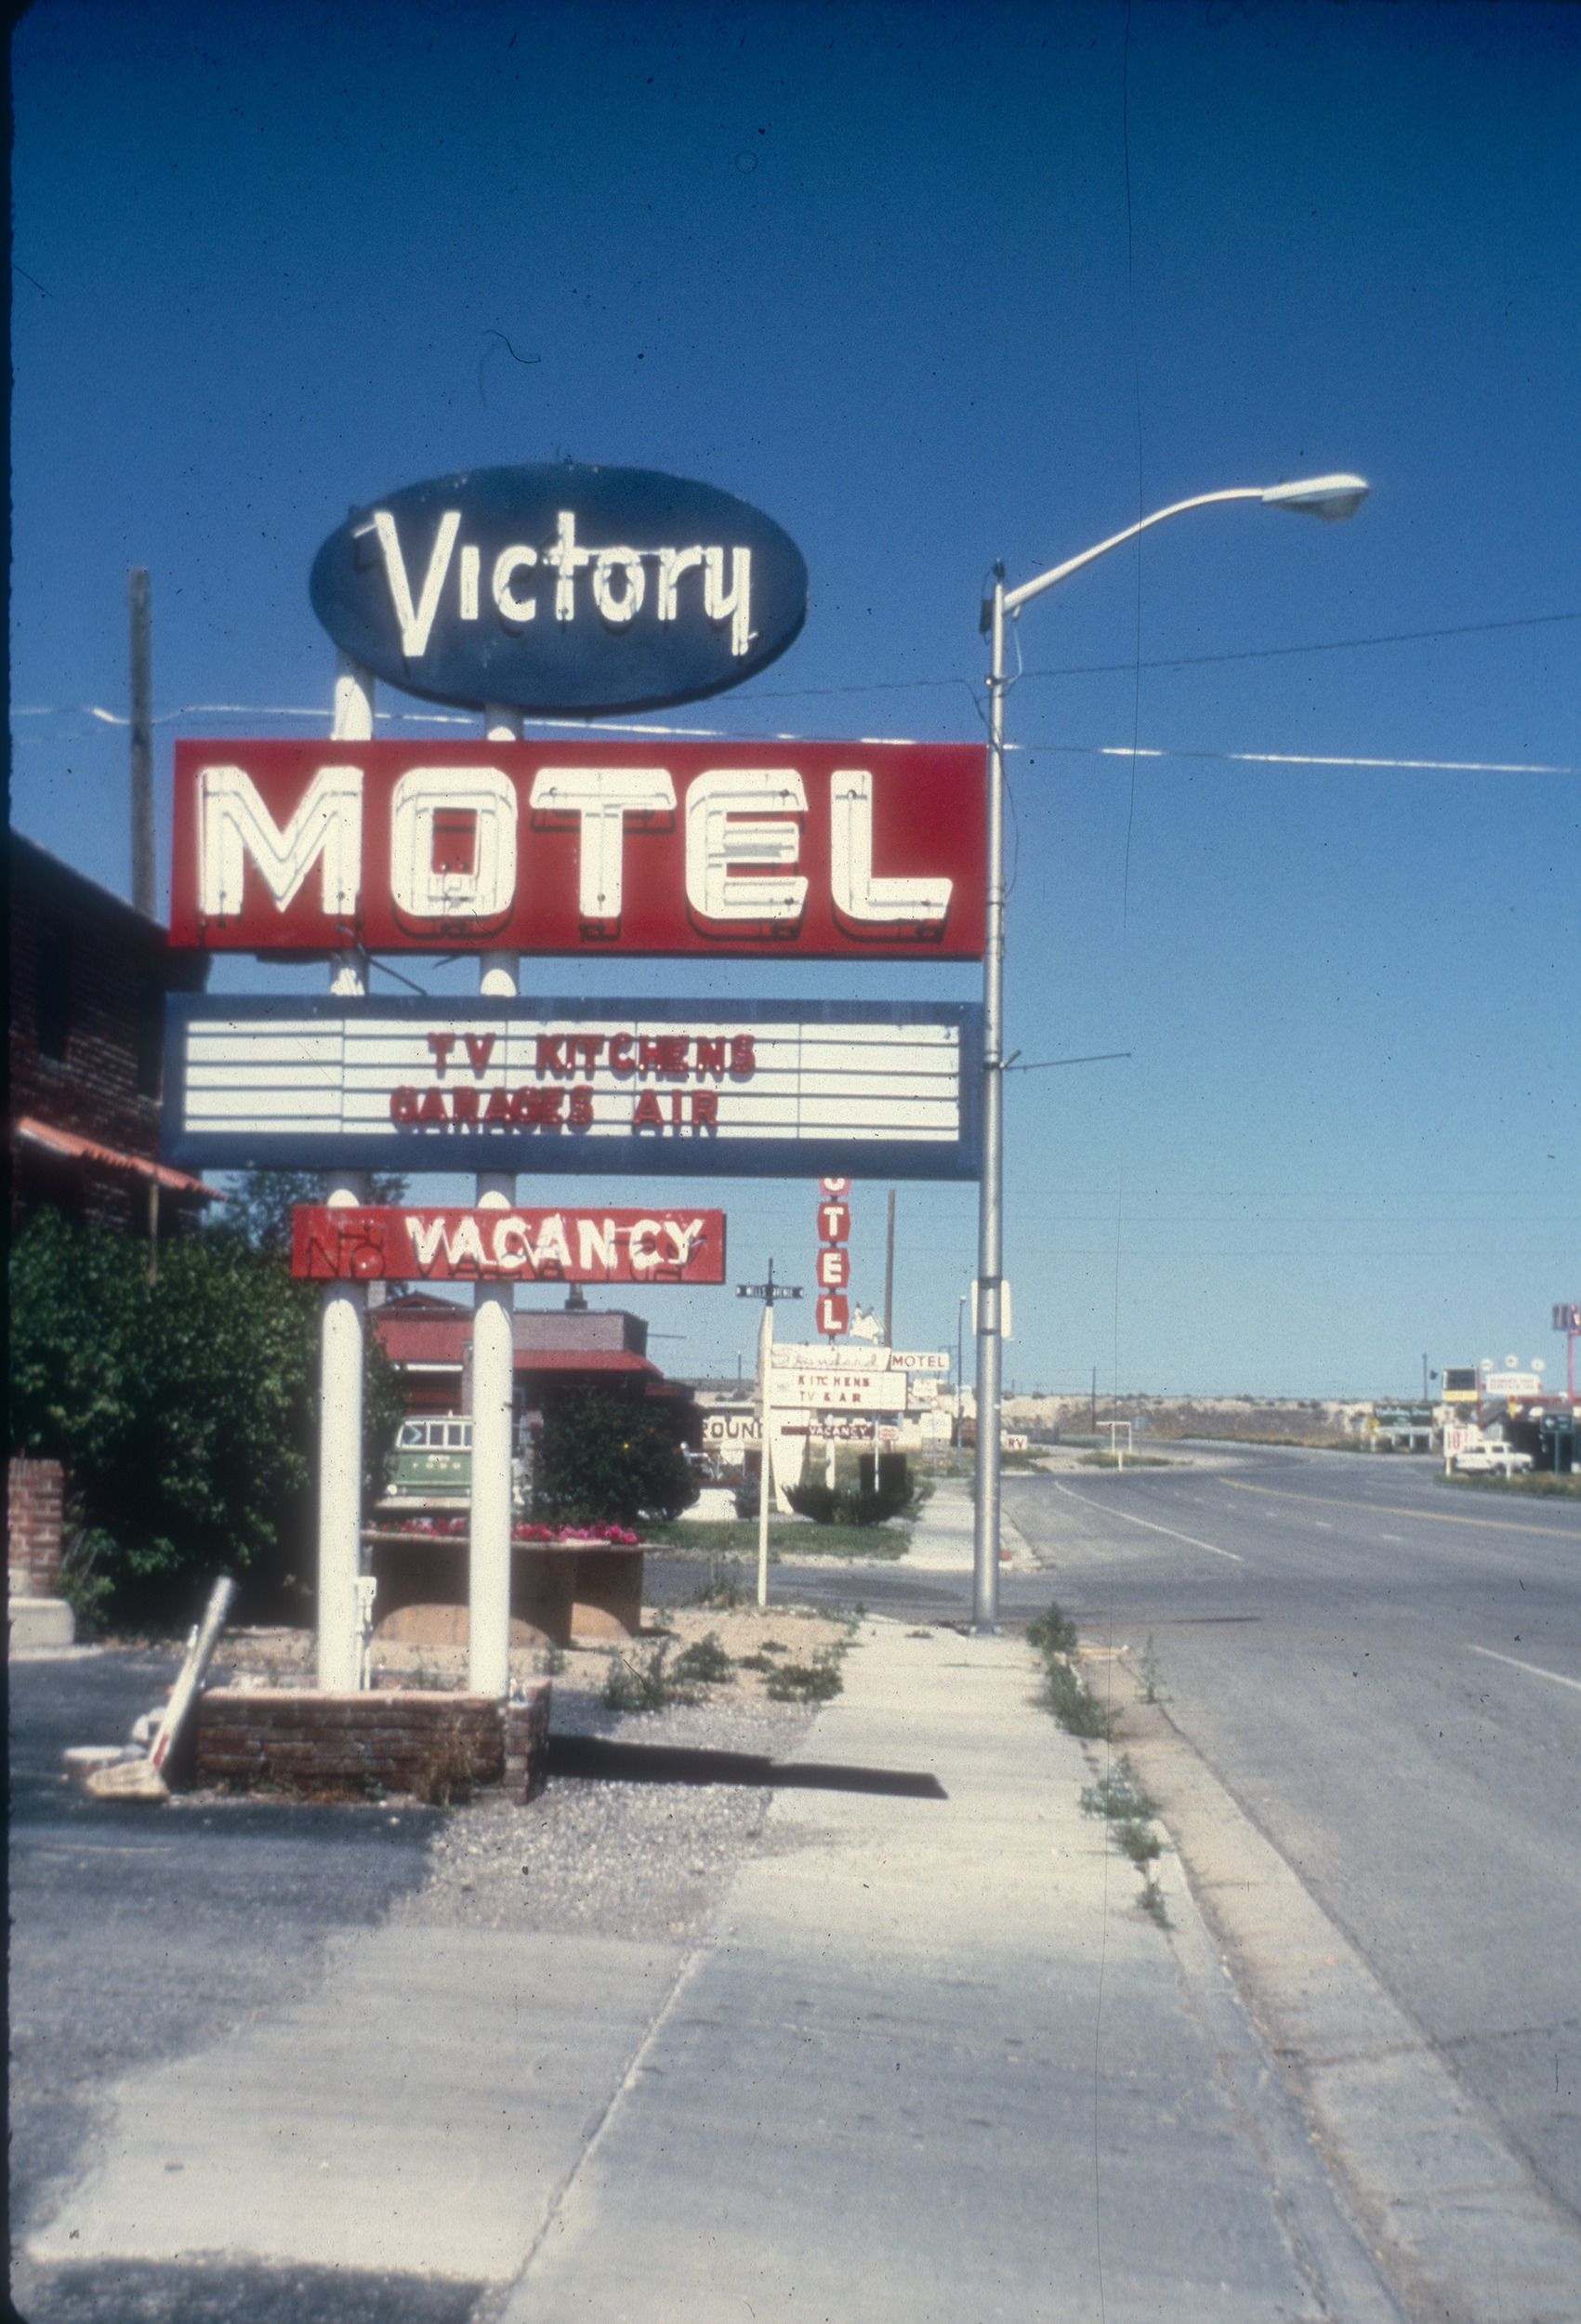 Slide of the Victory Motel, Wells, Nevada, 1986